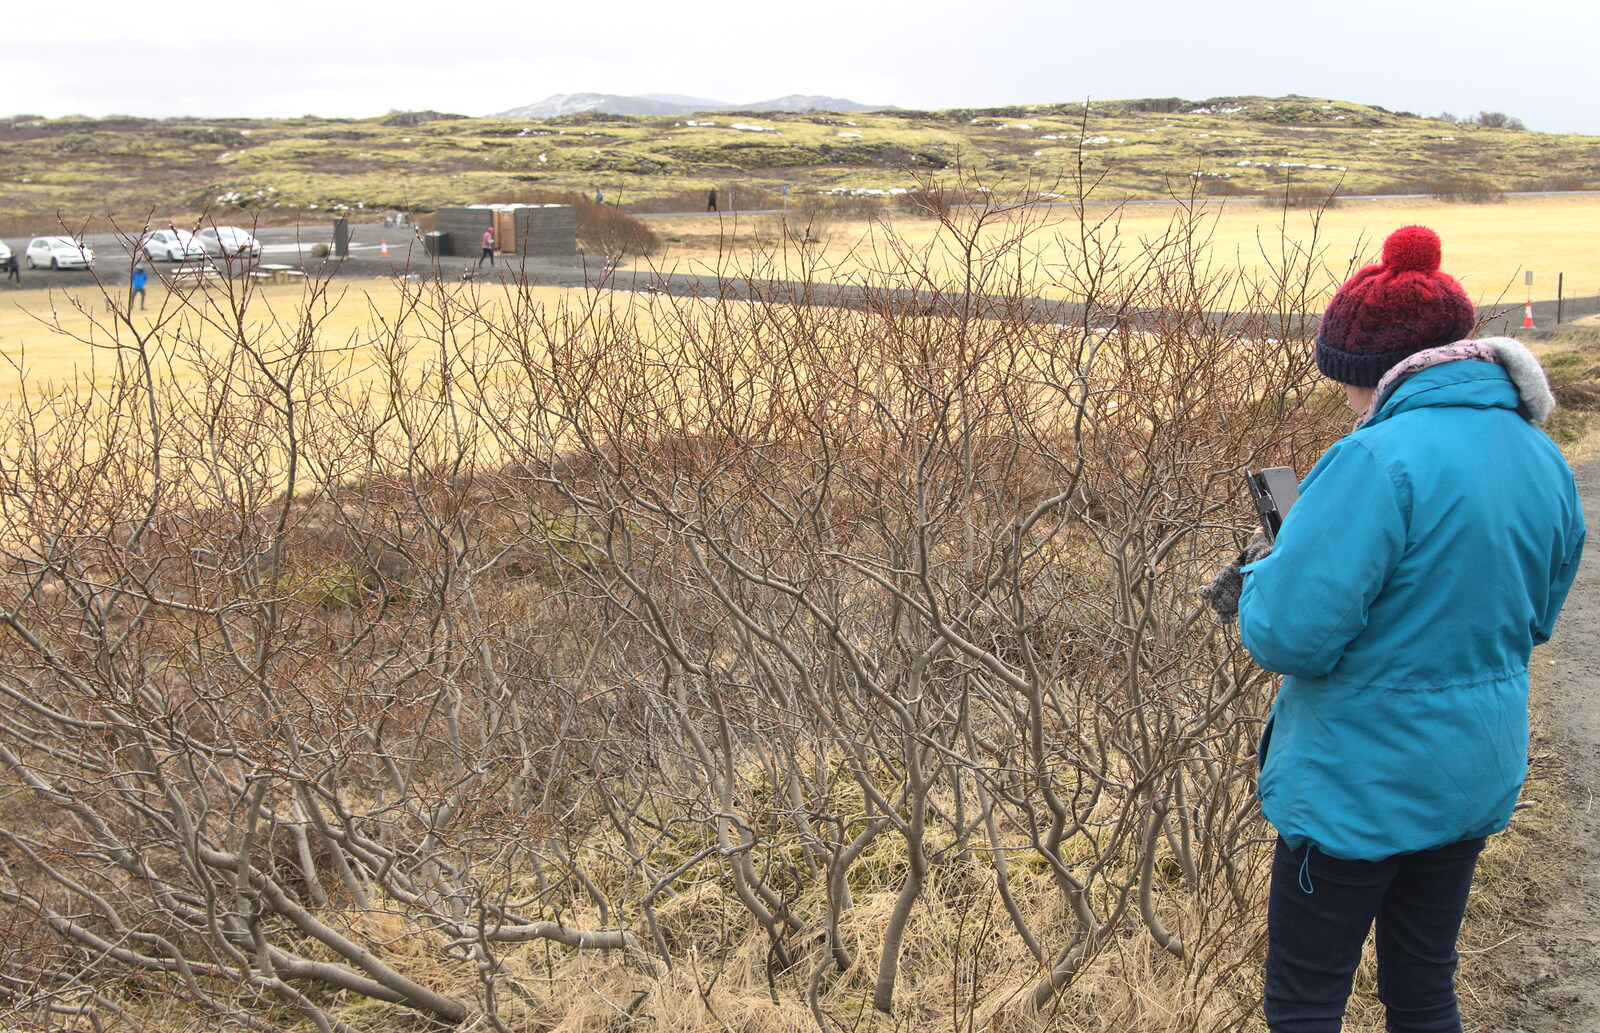 Isobel takes a photo of a bare bush from The Golden Circle of Ísland, Iceland - 22nd April 2017